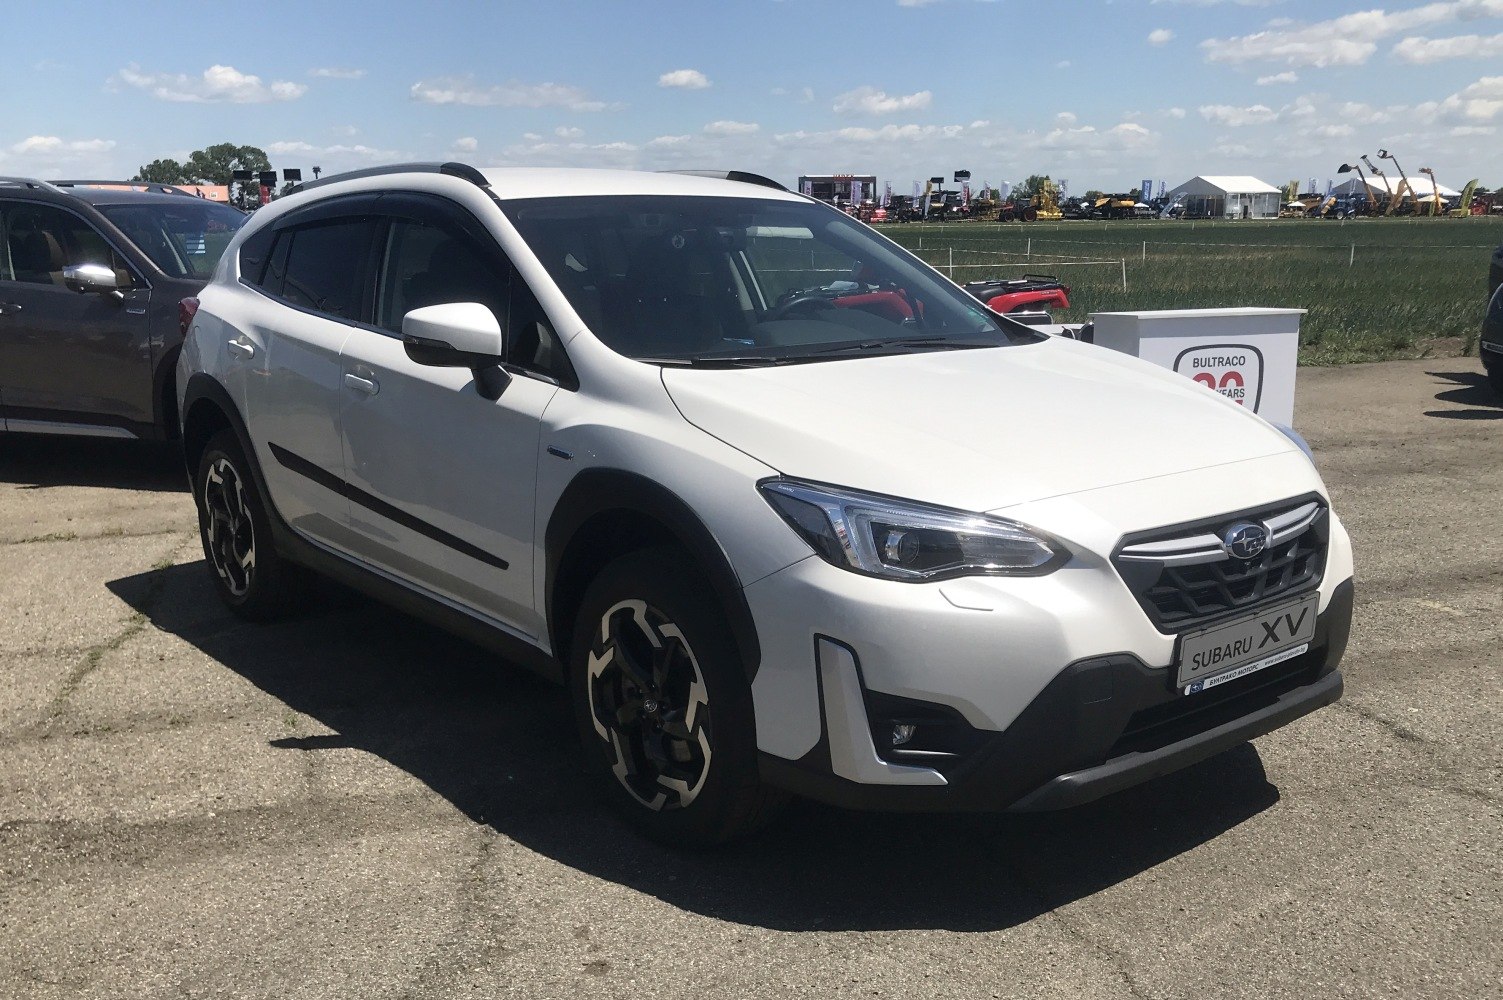 https://totalrenting.es/wp-content/uploads/2022/10/subaru-xv-ii-facelift-2021-2021-1-6i-114-cv-awd-lineartronic-suv.png